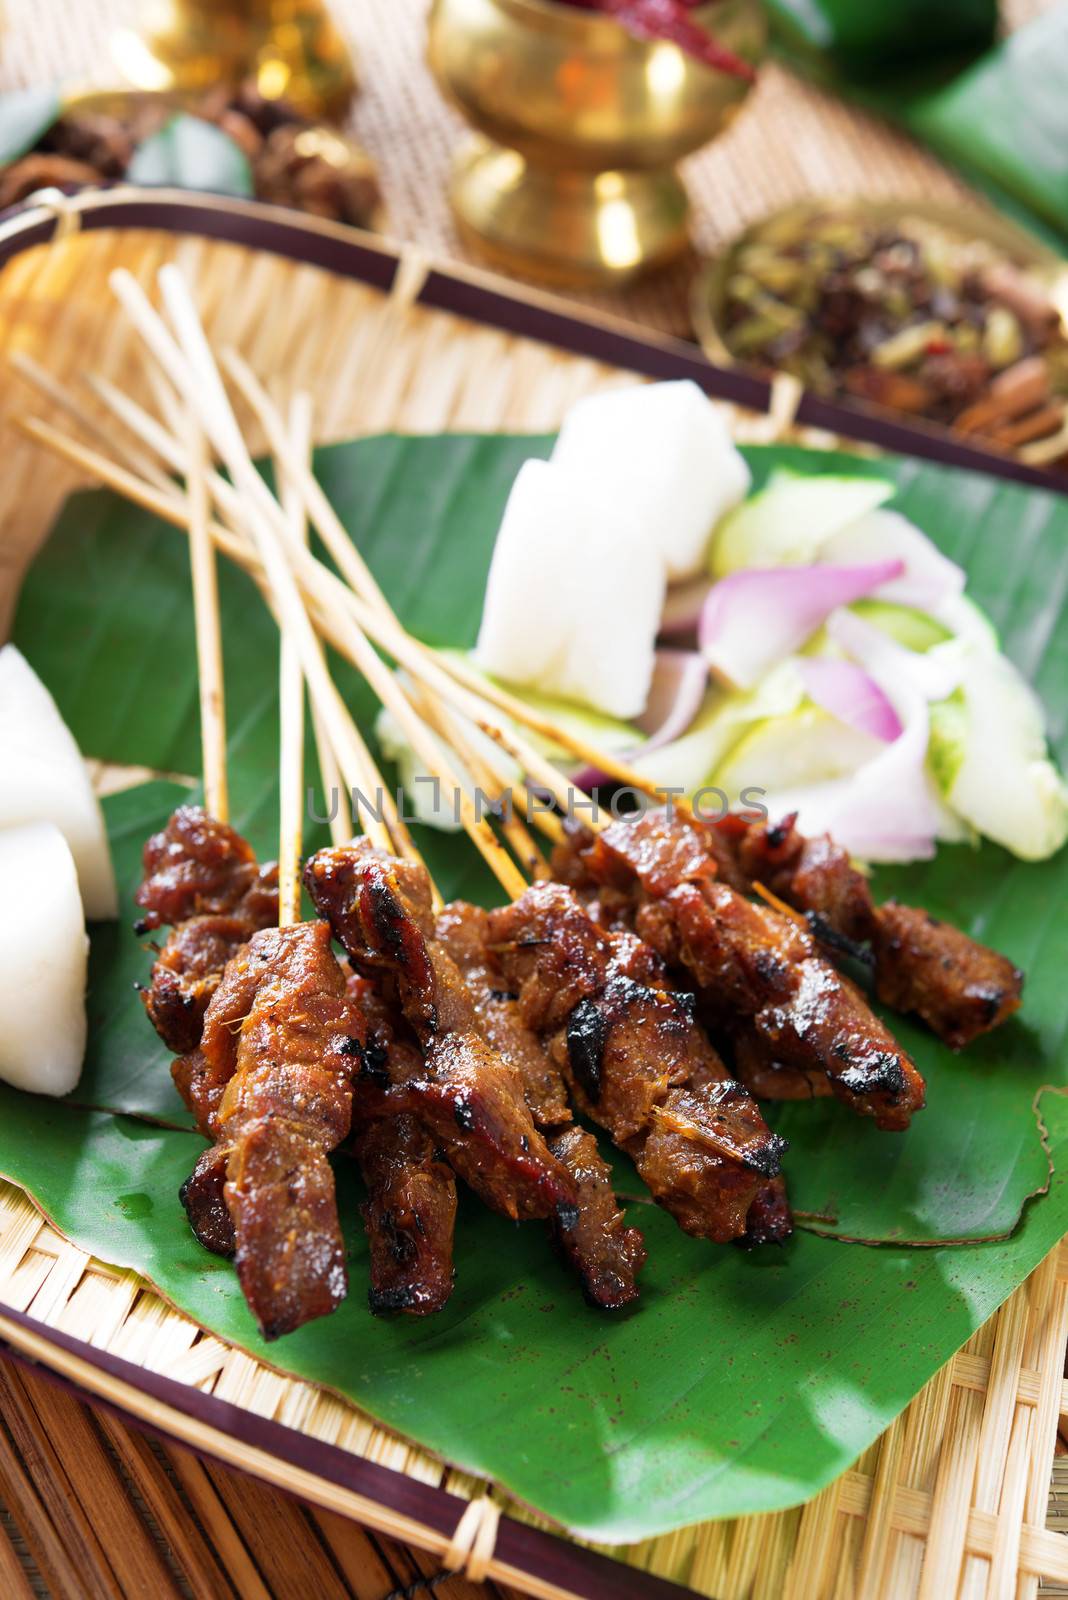 Beef satay, roasted meat skewer Asia food.
 Traditional Southeast Asia food.  Hot and spicy Southeast Asian dish, Asian cuisine.
